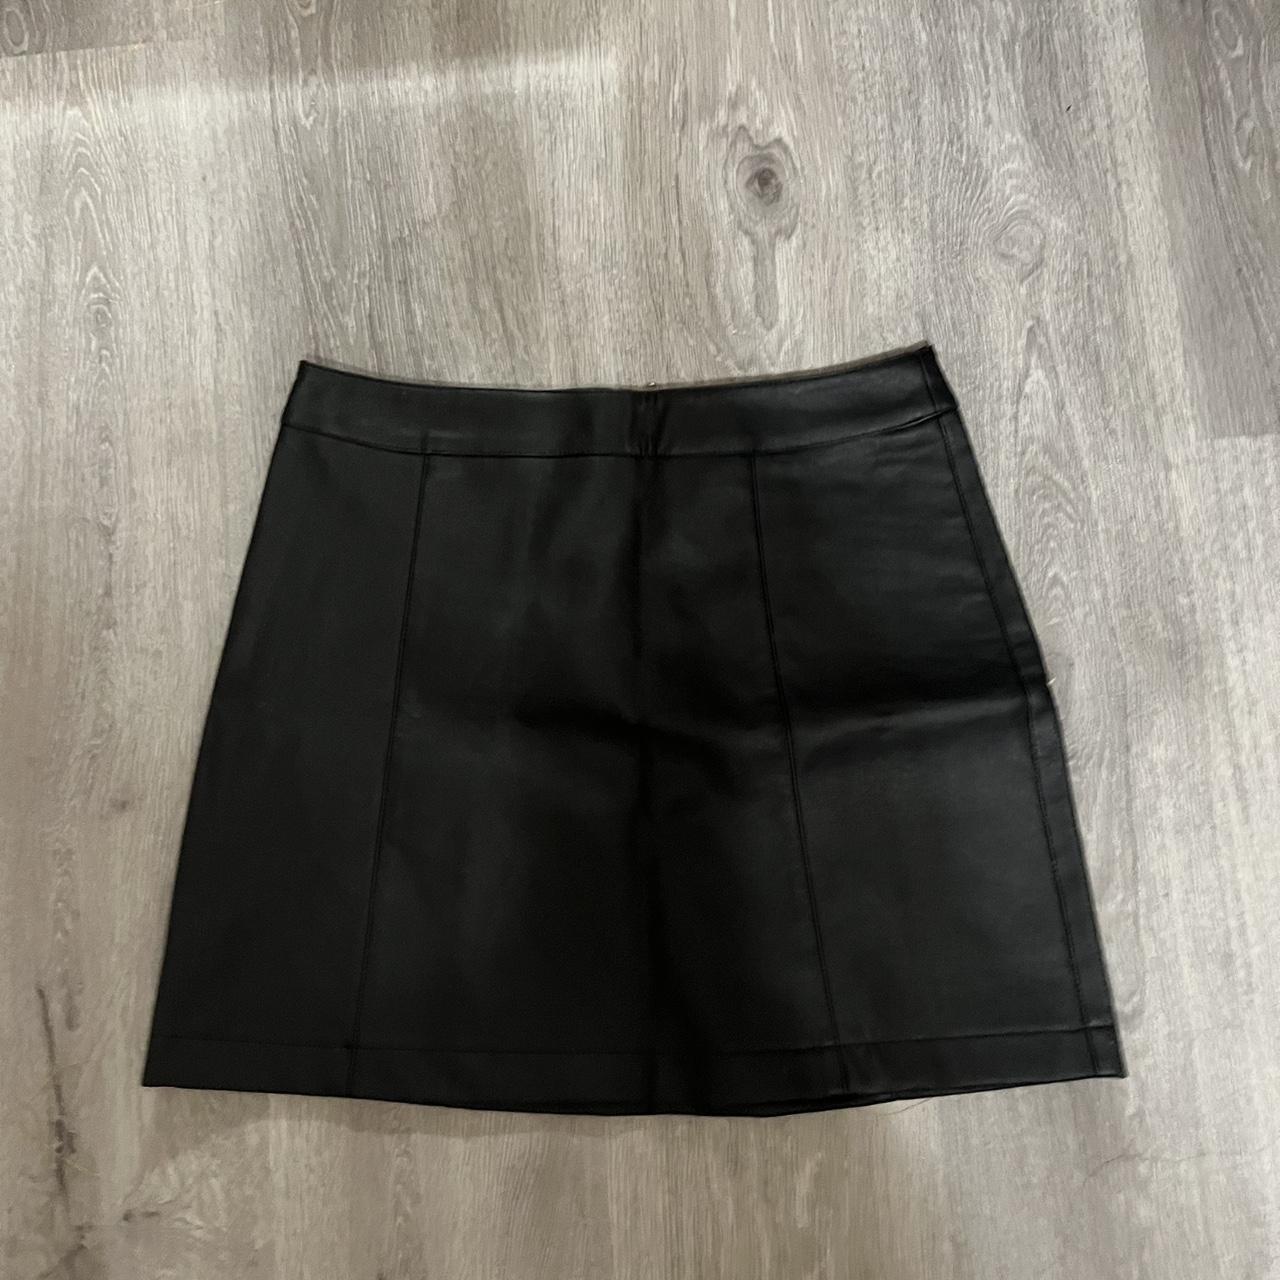 Black Forever 21 leather skirt, new with tags, size M - Depop